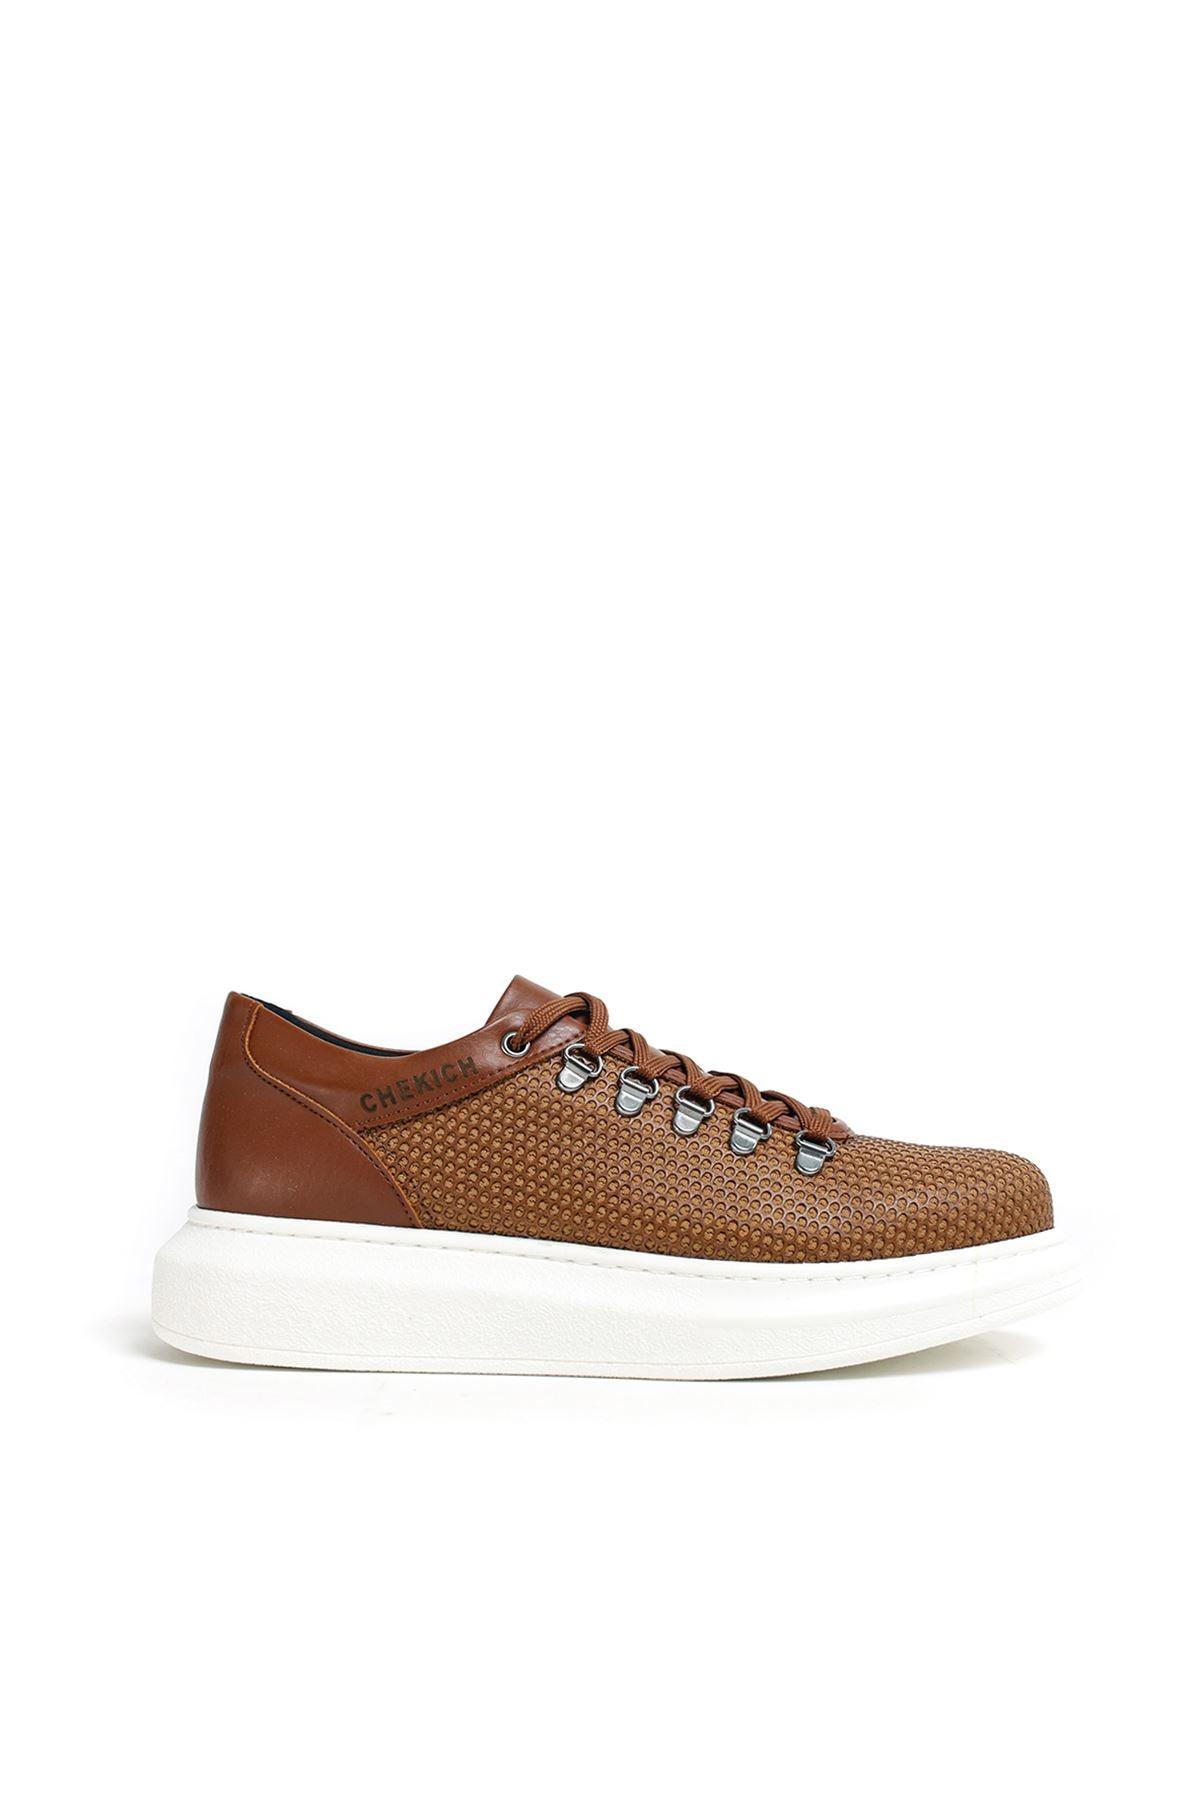 CH021 Men's Unisex Brown-White Sole Honeycomb Processing Casual Sneaker Sports Shoes - STREET MODE ™